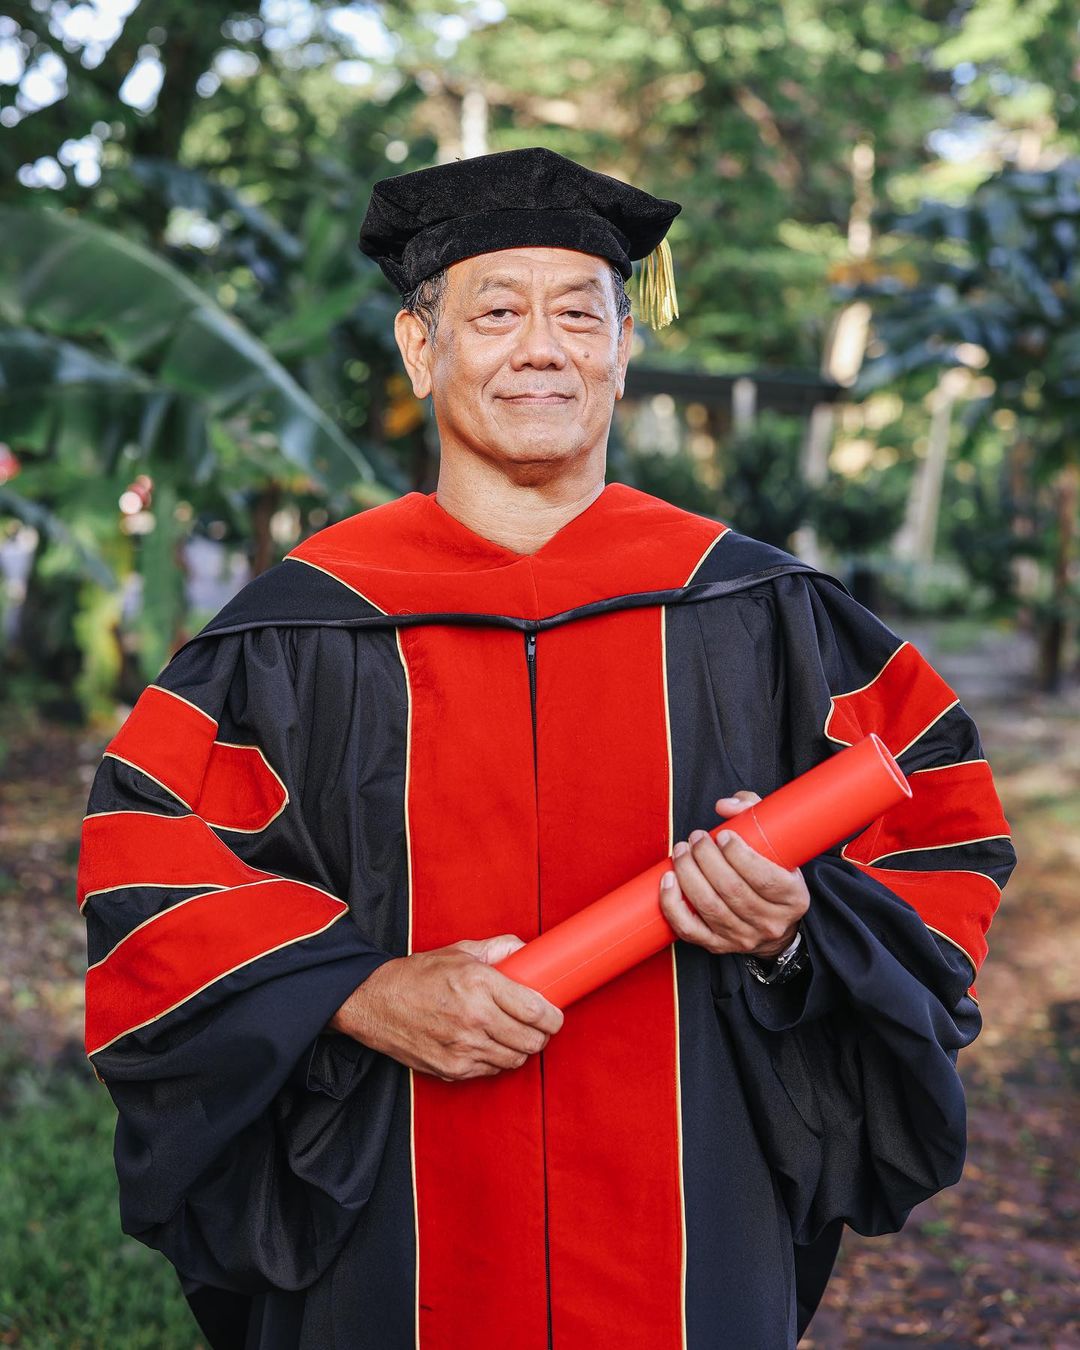 62-year-old Rev. Teo How Ken has just obtained his Doctoral Degree in Marketplace Theology. Image credit: Photo courtesy of Annice Lyn